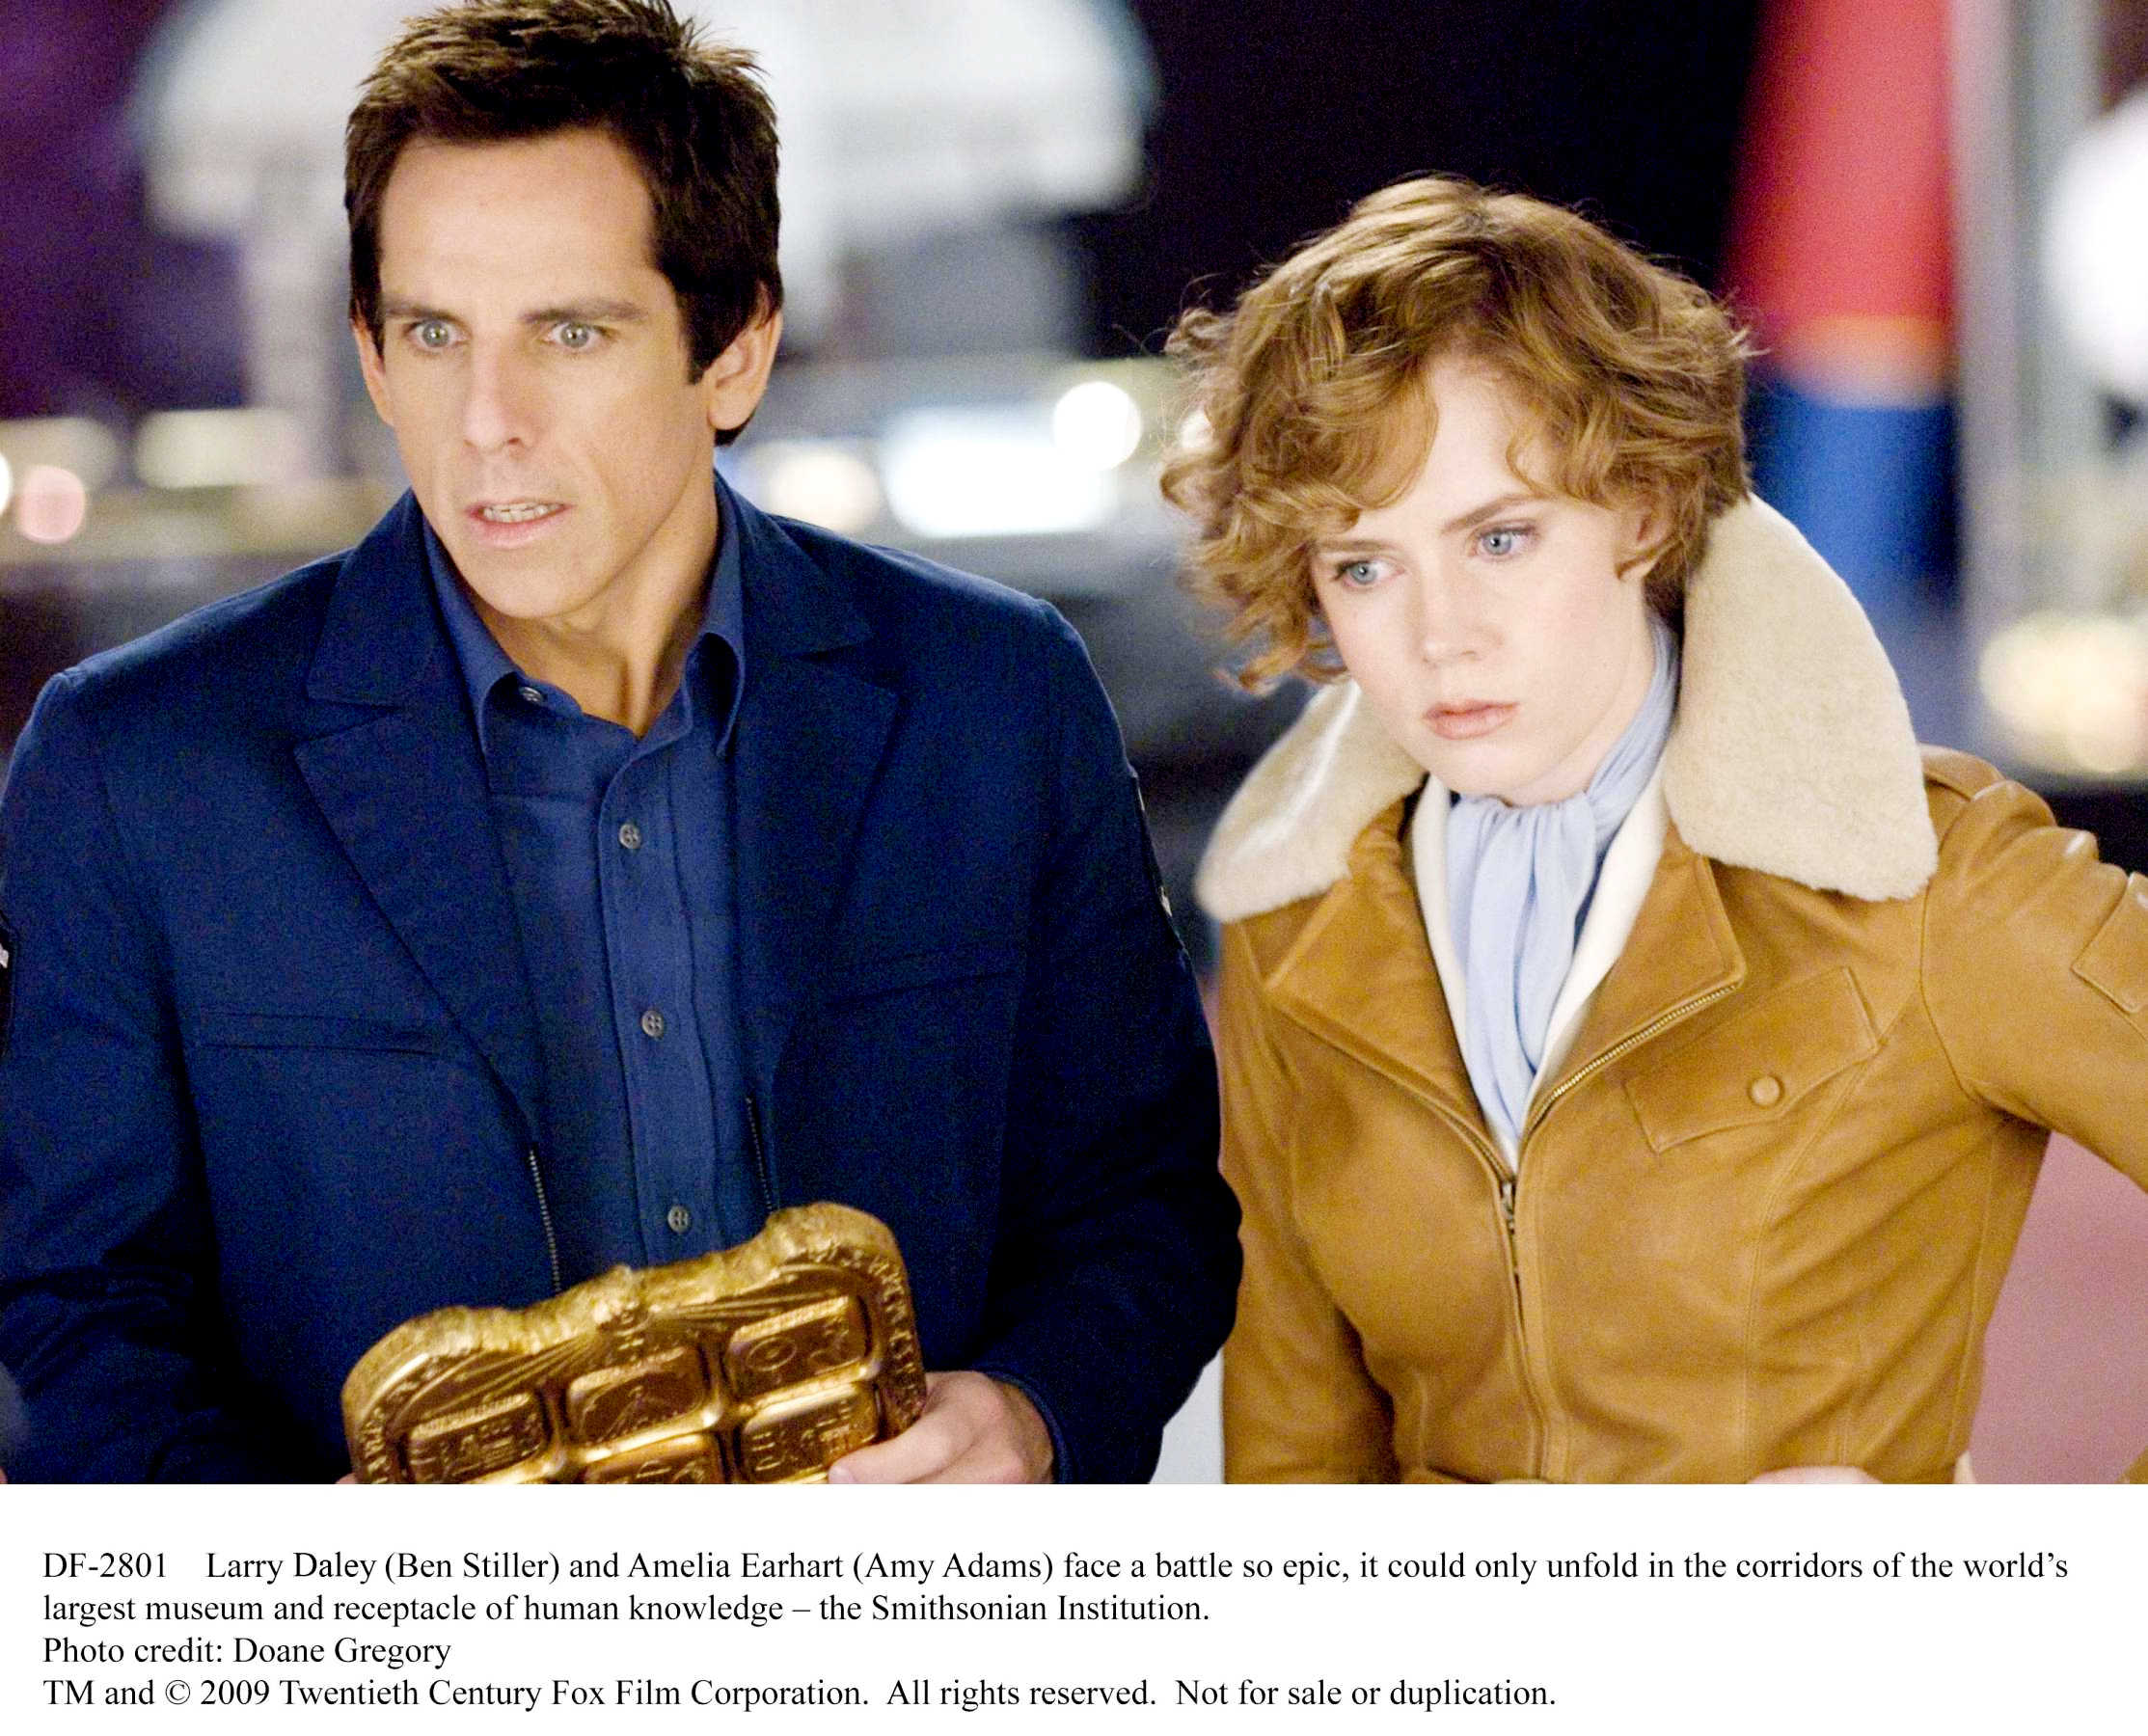 Ben Stiller stars as Larry Daley and Amy Adams stars as Amelia Earhart in 20th Century Fox's Night at the Museum 2: Battle of the Smithsonian (2009). Photo credit by Doane Gregory.